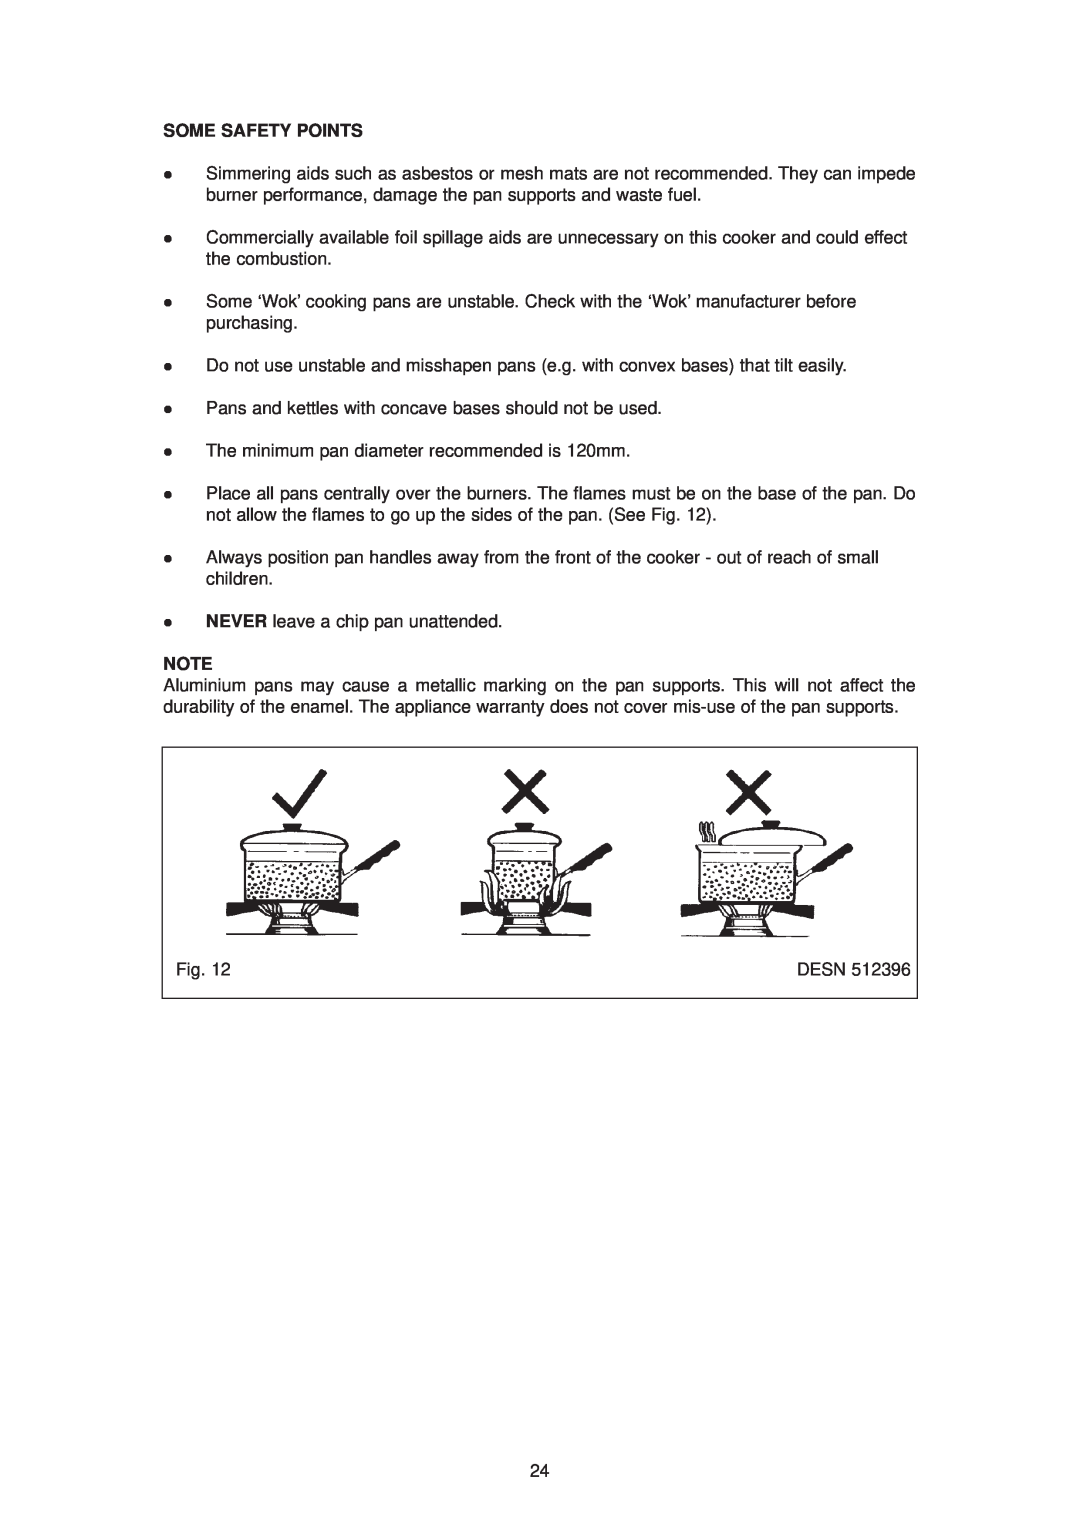 Aga Ranges dc6 owner manual Some Safety Points 